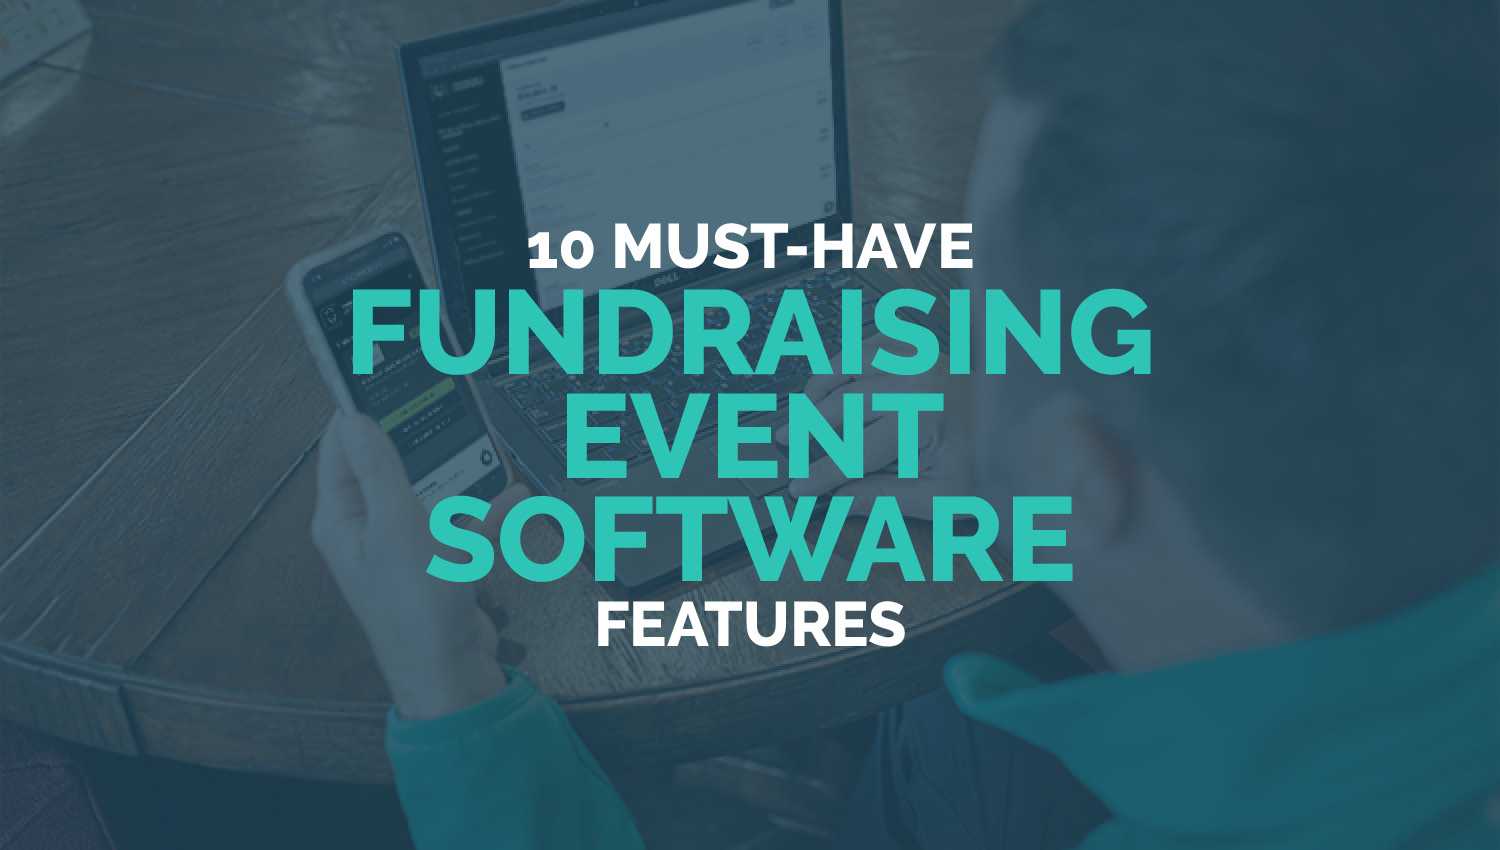 Learn about key fundraising event software features to take your next gathering to the next level.